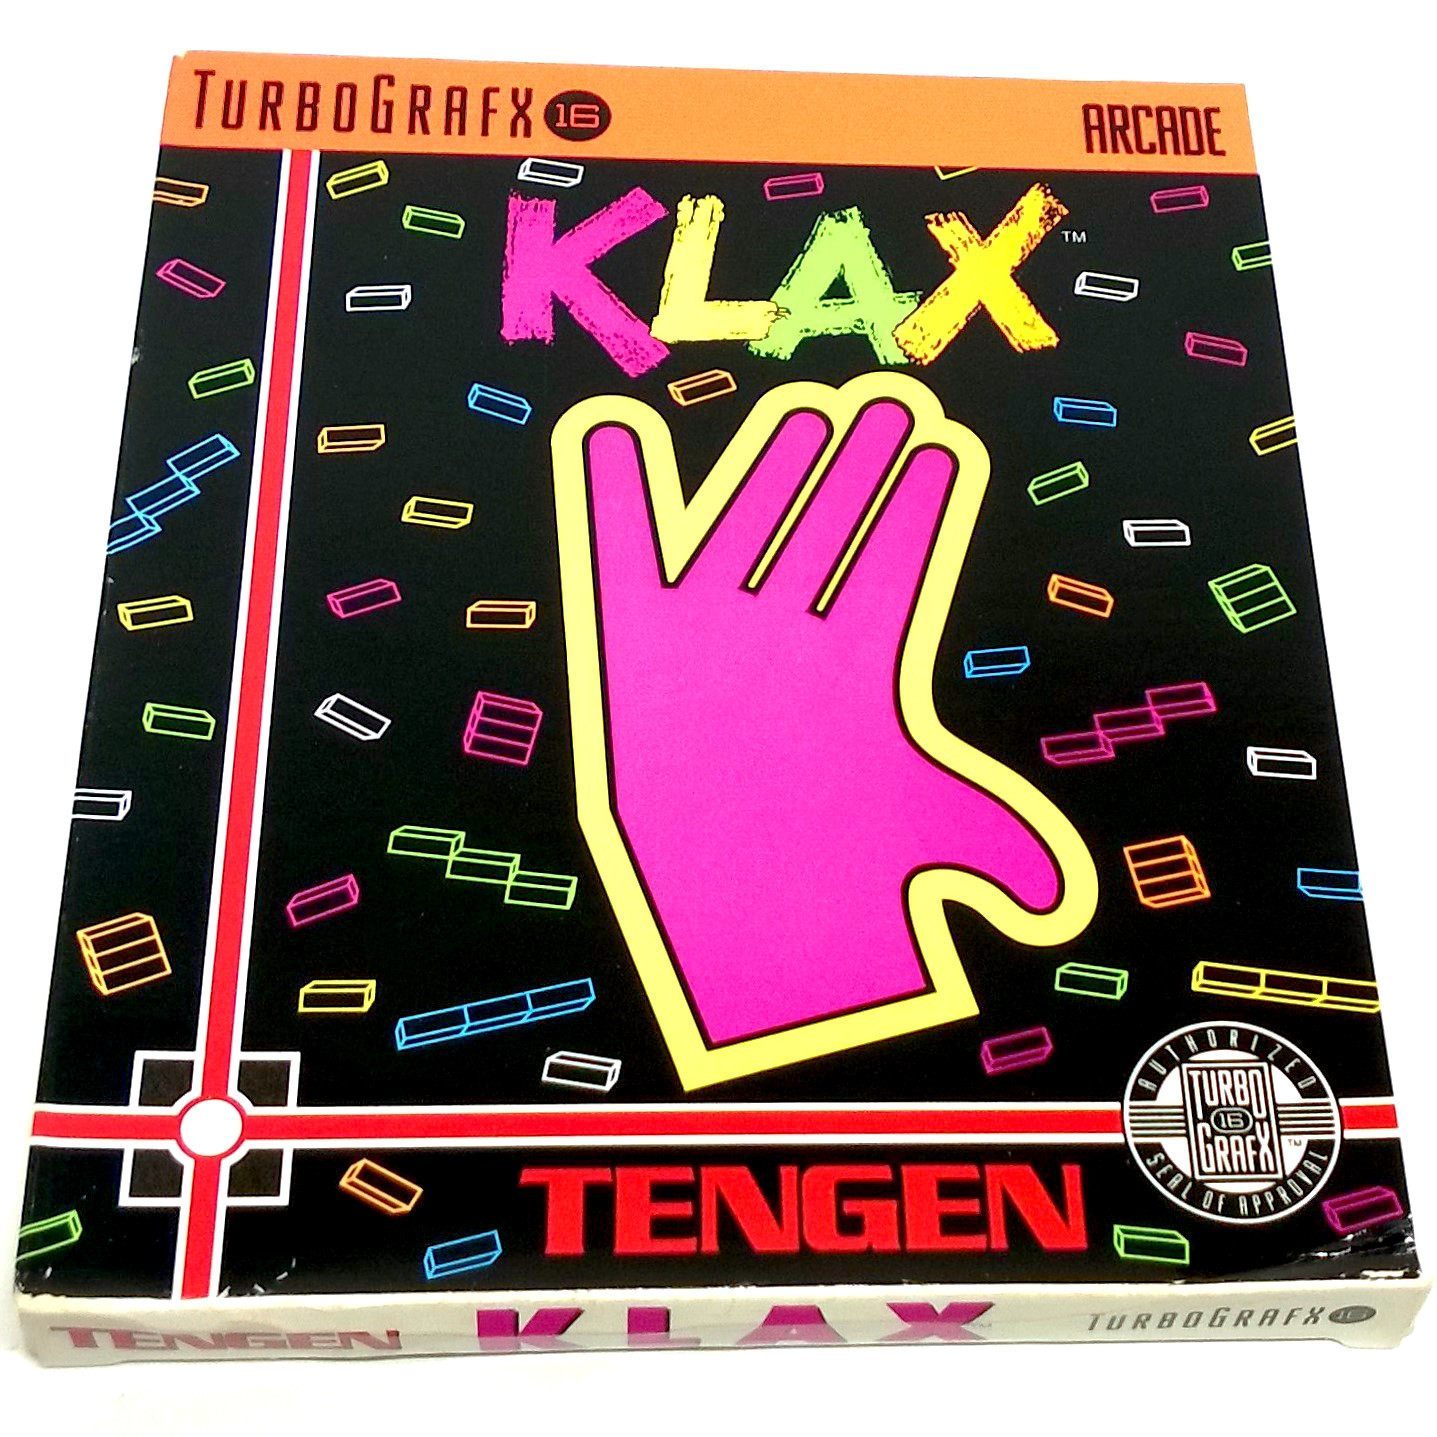 Klax for TurboGrafx-16 - Front of box